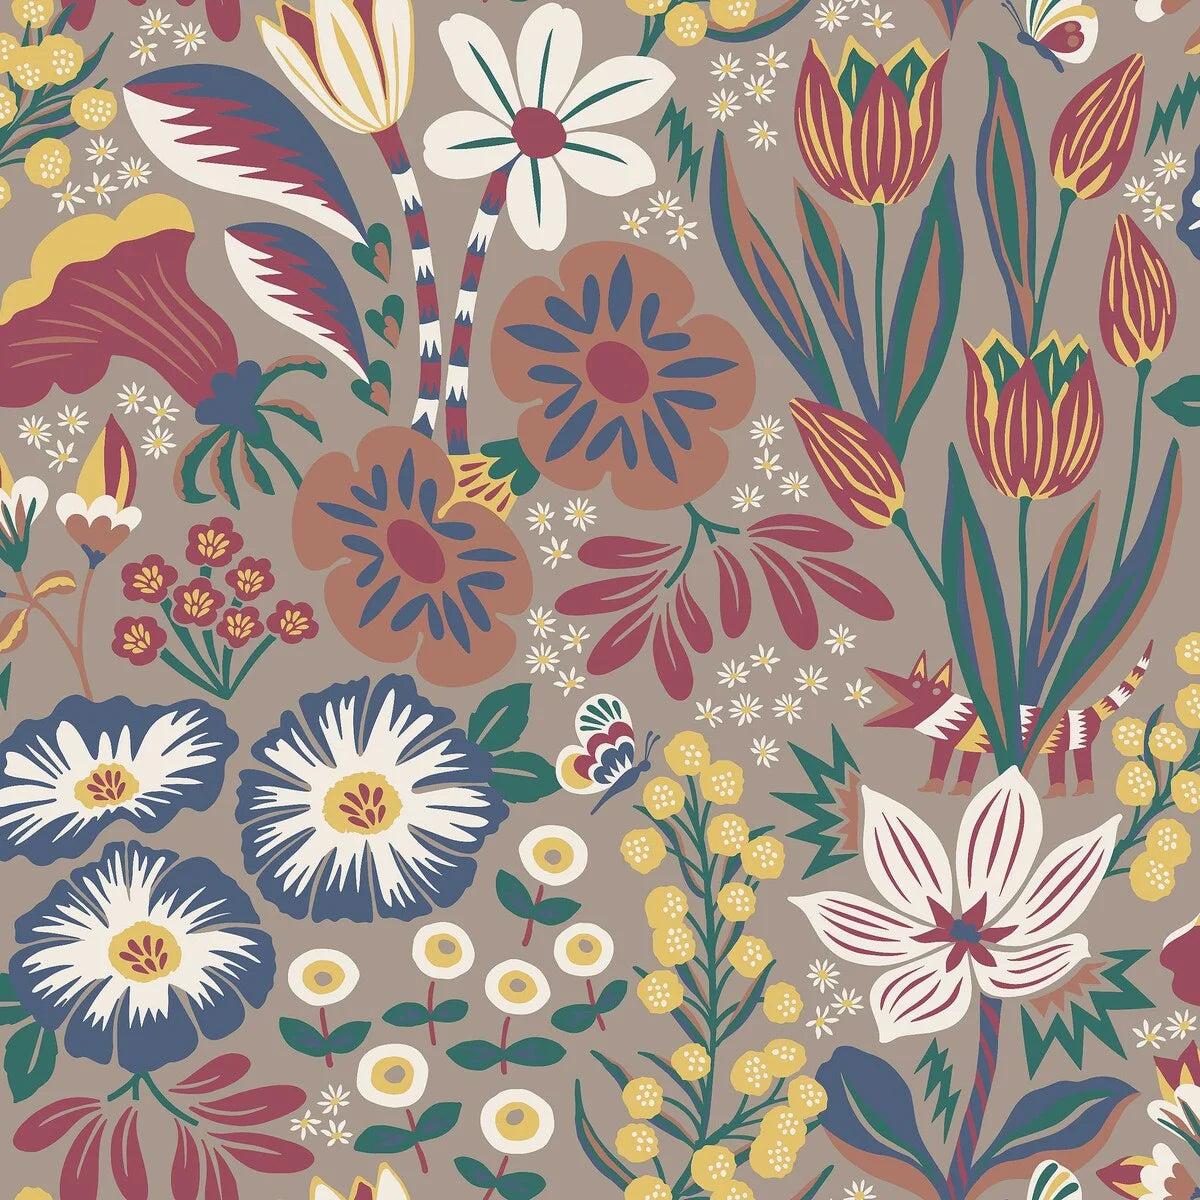 Set on an almond-colored base, our Trädgården wallpaper features dark green leaves, yellow mimosas, burgundy and white tulips interspersed with charming butterflies.